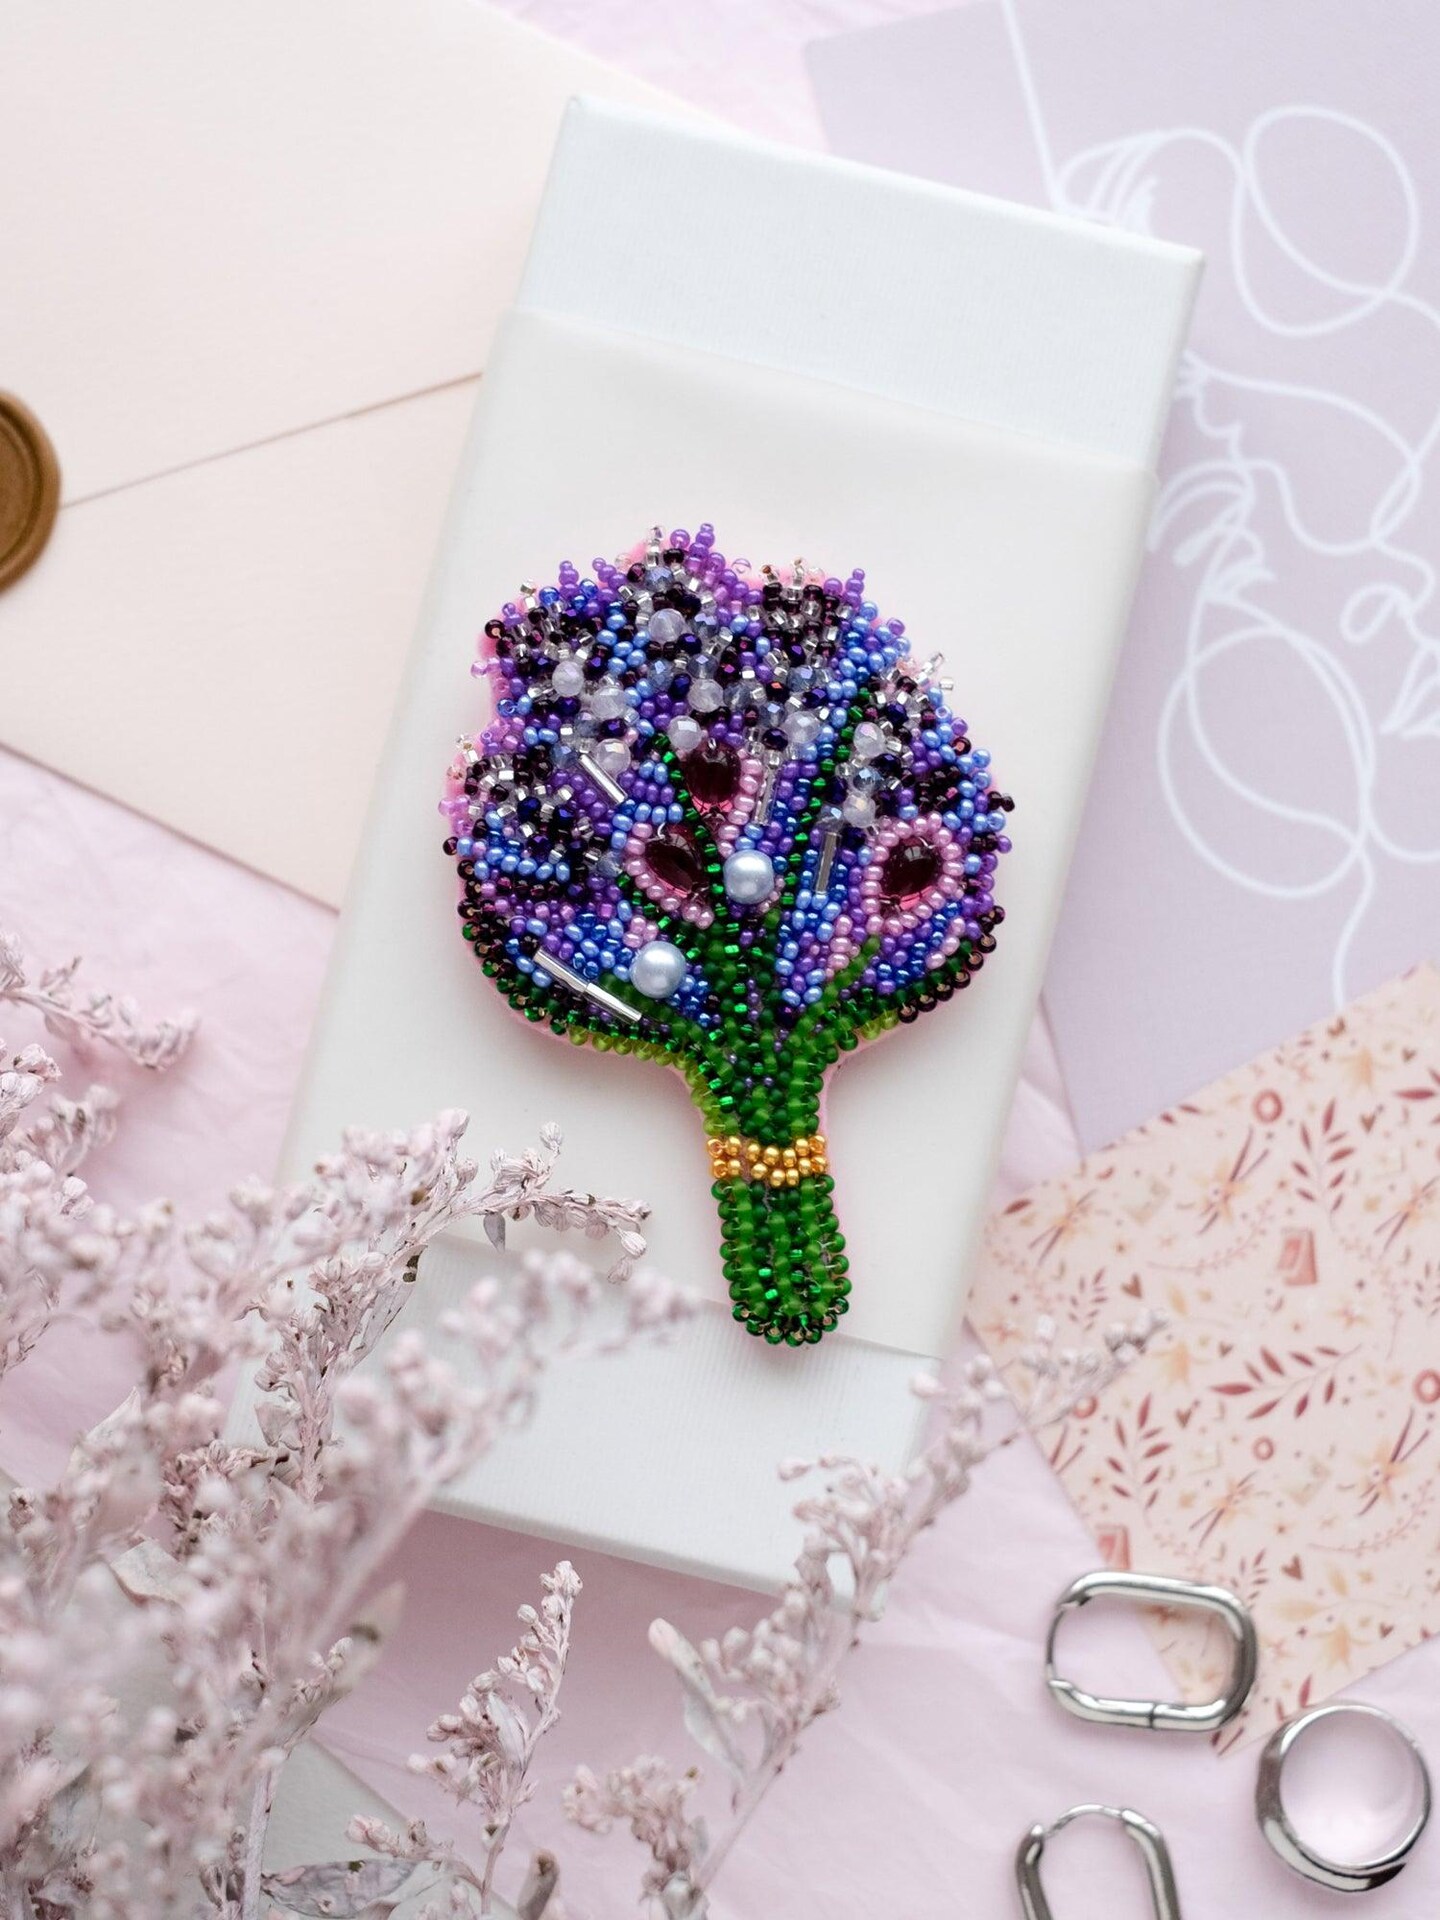 Bead Embroidery Decoration Kit Lavender AD-074